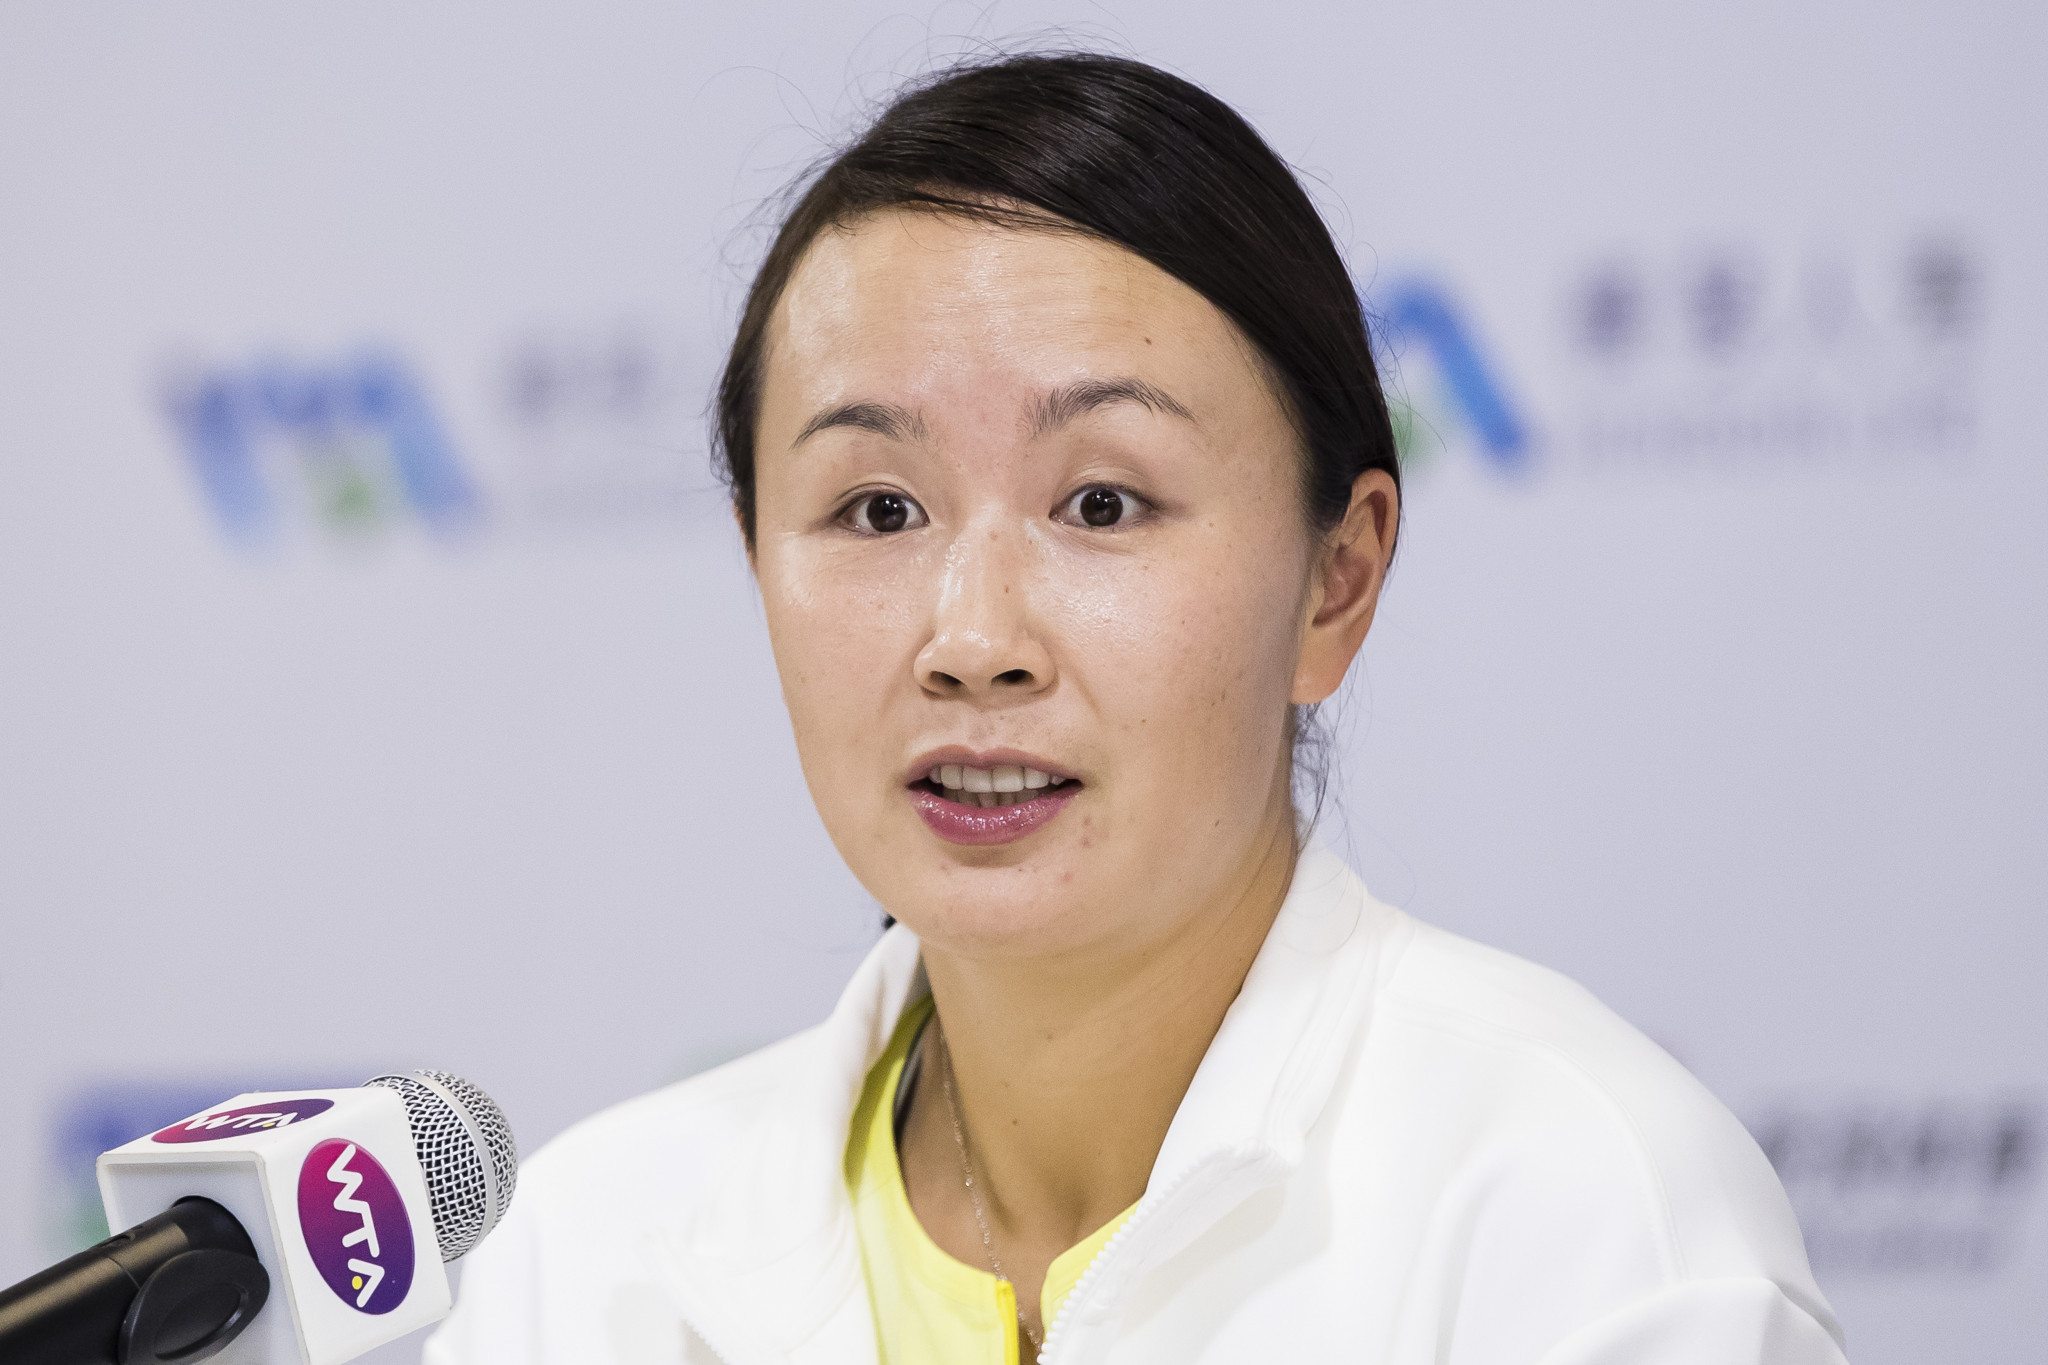 Peng Shuai has been missing since November 2, when she made sexual assault allegations against a high-ranking Chinese official ©Getty Images